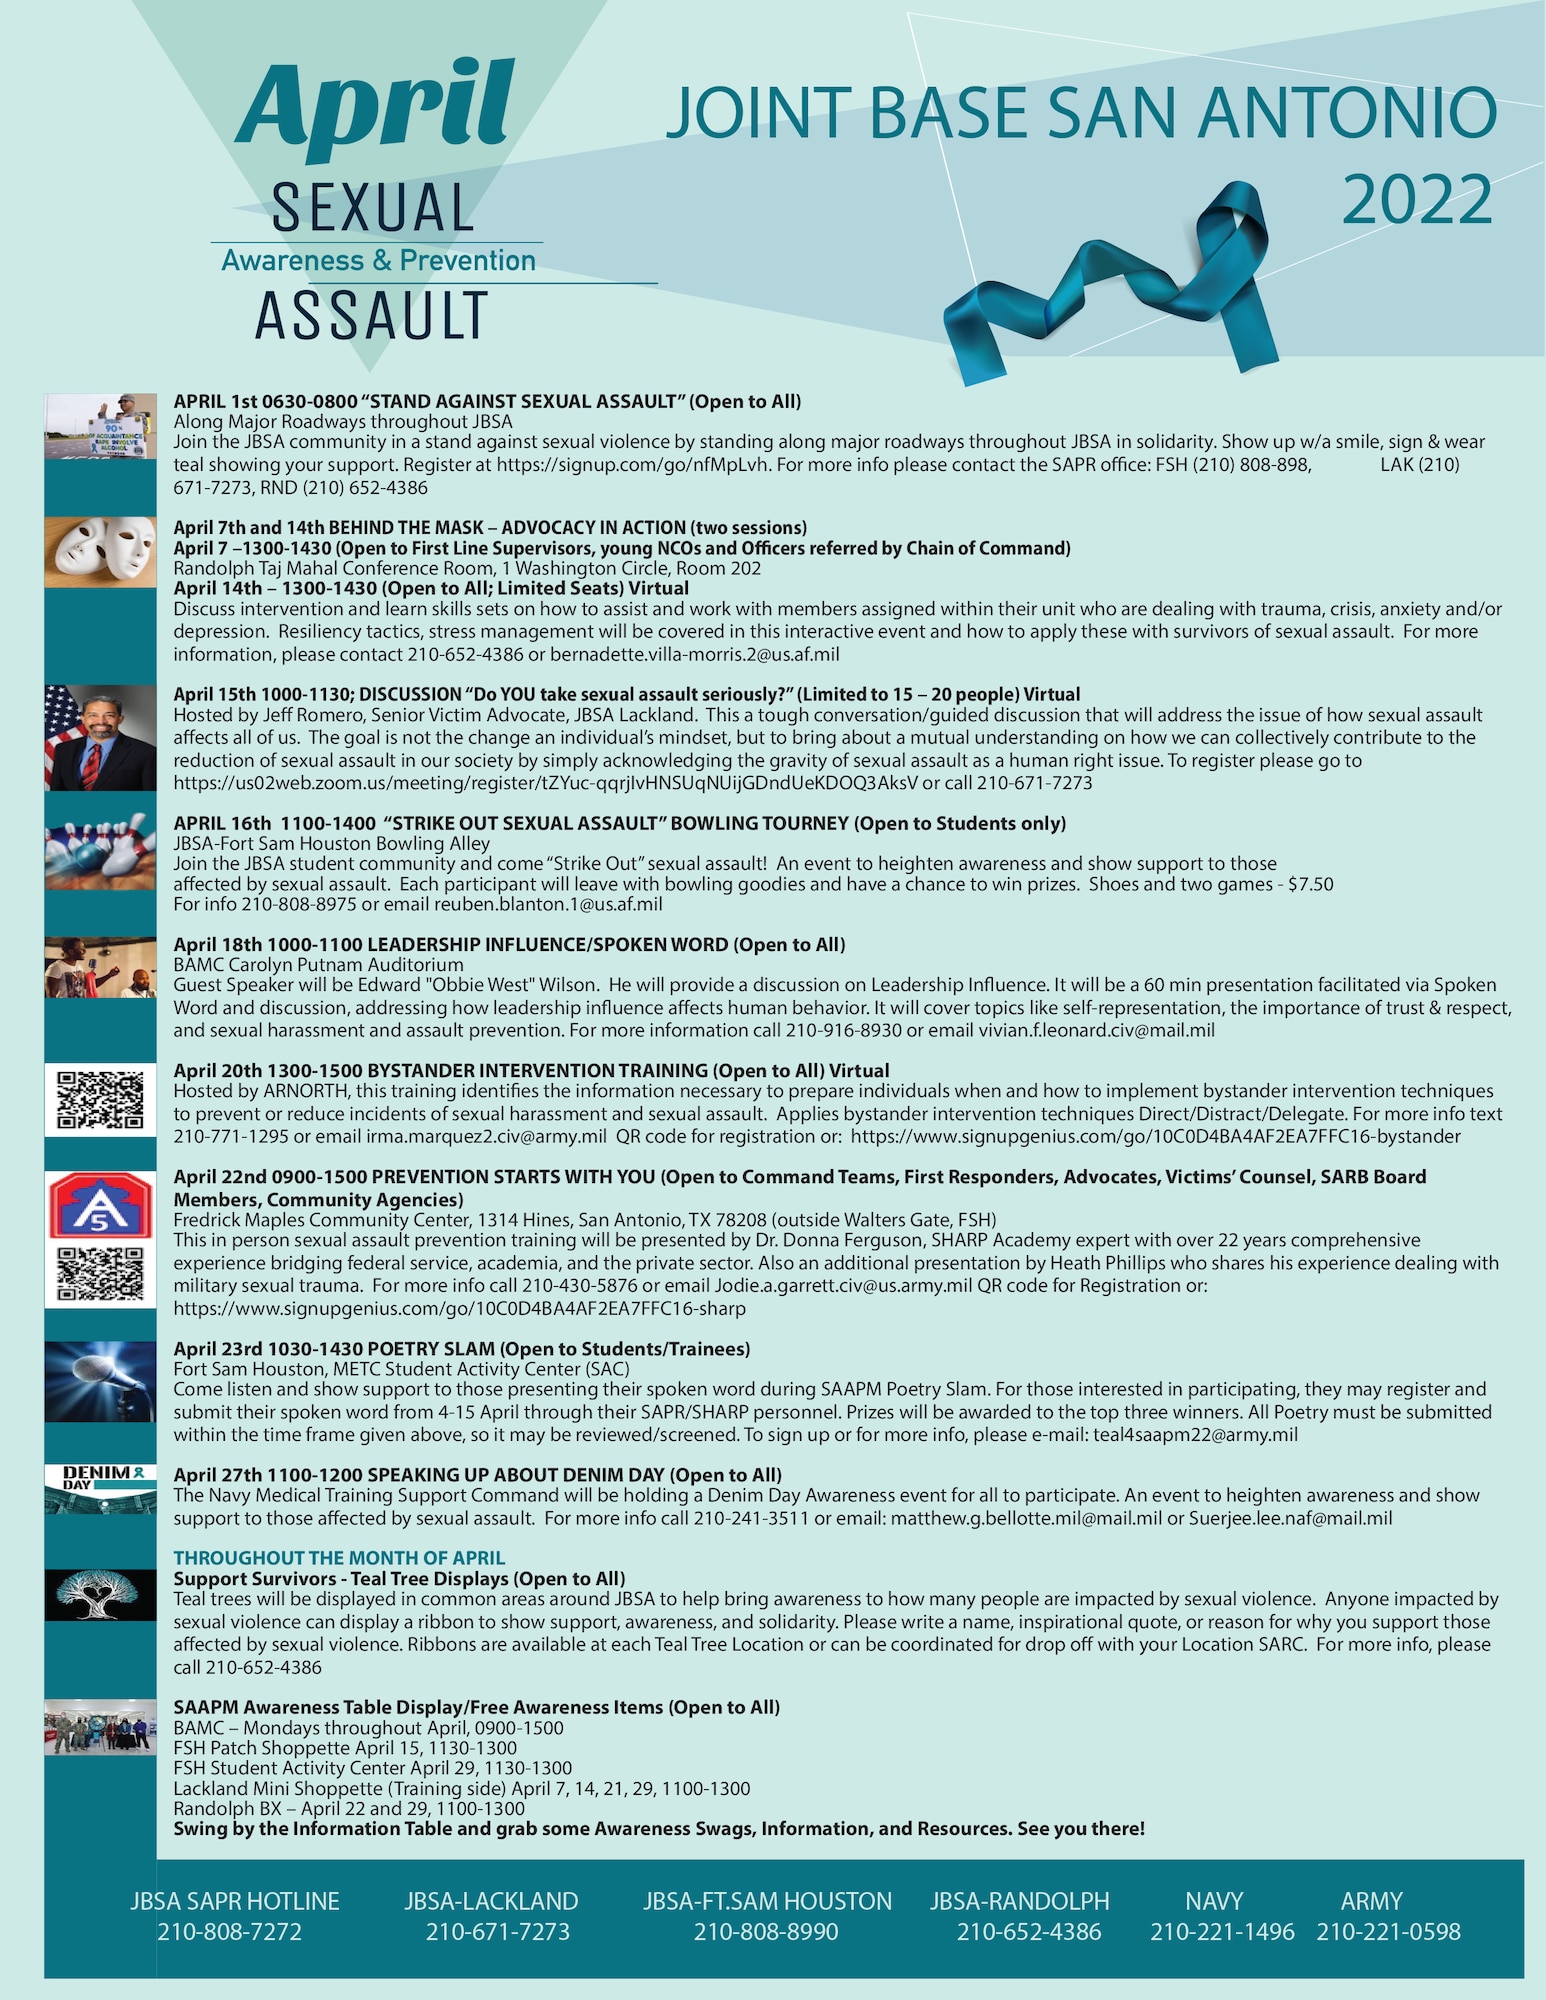 Sexual Assault Awareness And Prevention Month Step Forward Prevent